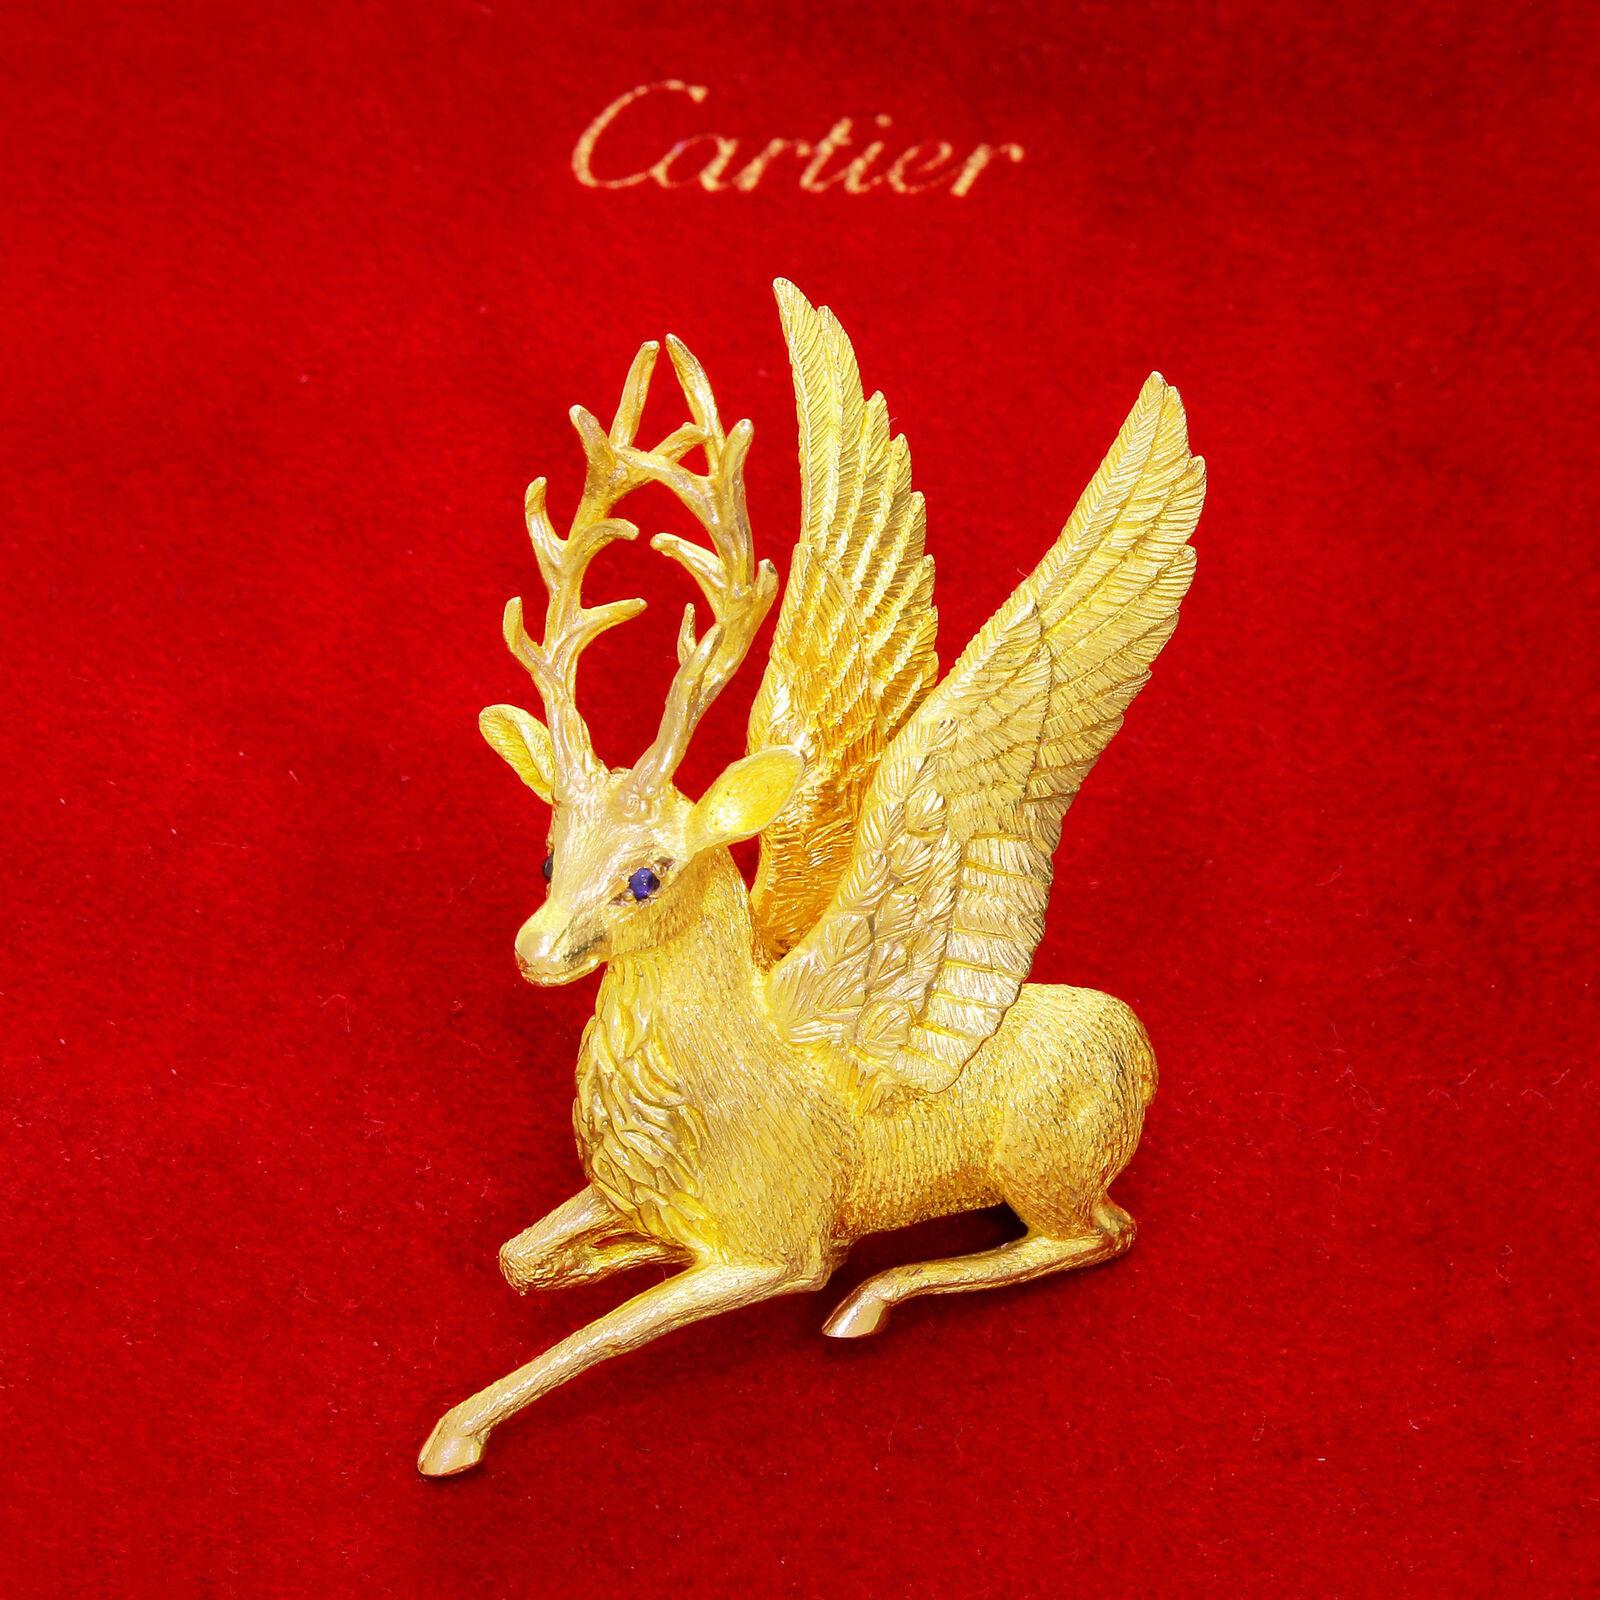 Exquisite majestic Cartier Mythological 18k yellow gold winged reindeer / deer stag from a private collection.
The highest quality craftsmanship is evident throughout this piece. From the palm of the antler rack down to the shiny hooves, the